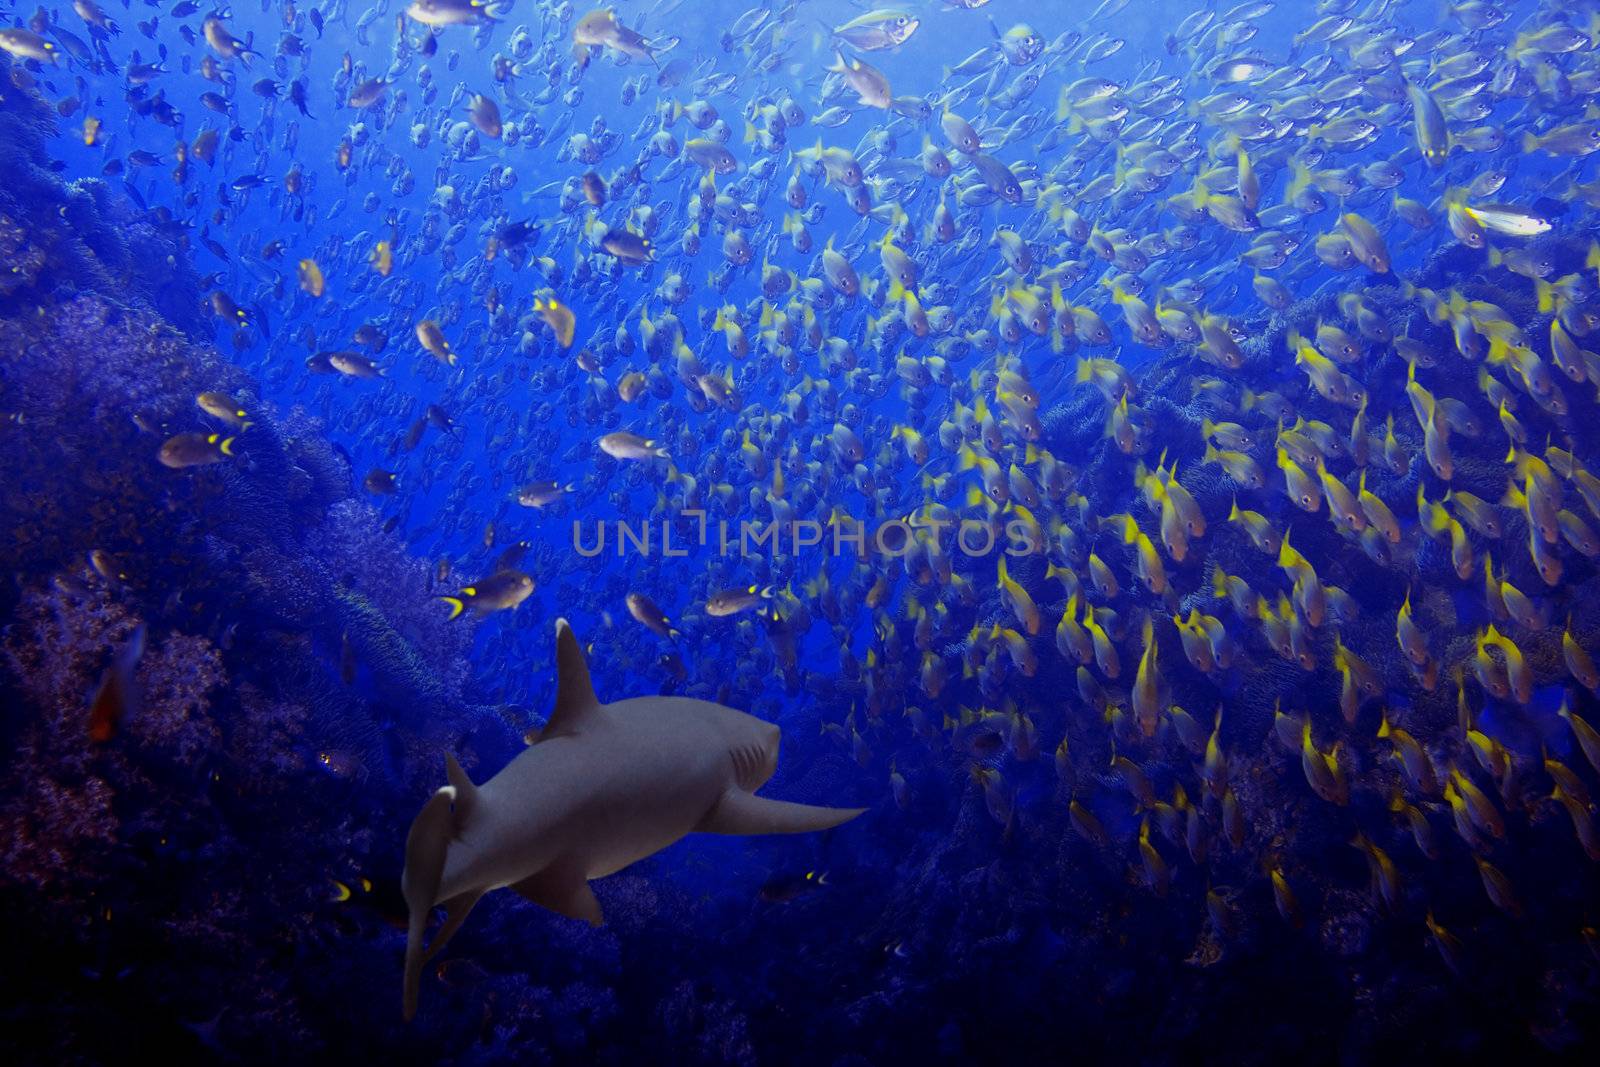 Whitetip reef shark among a school of fish